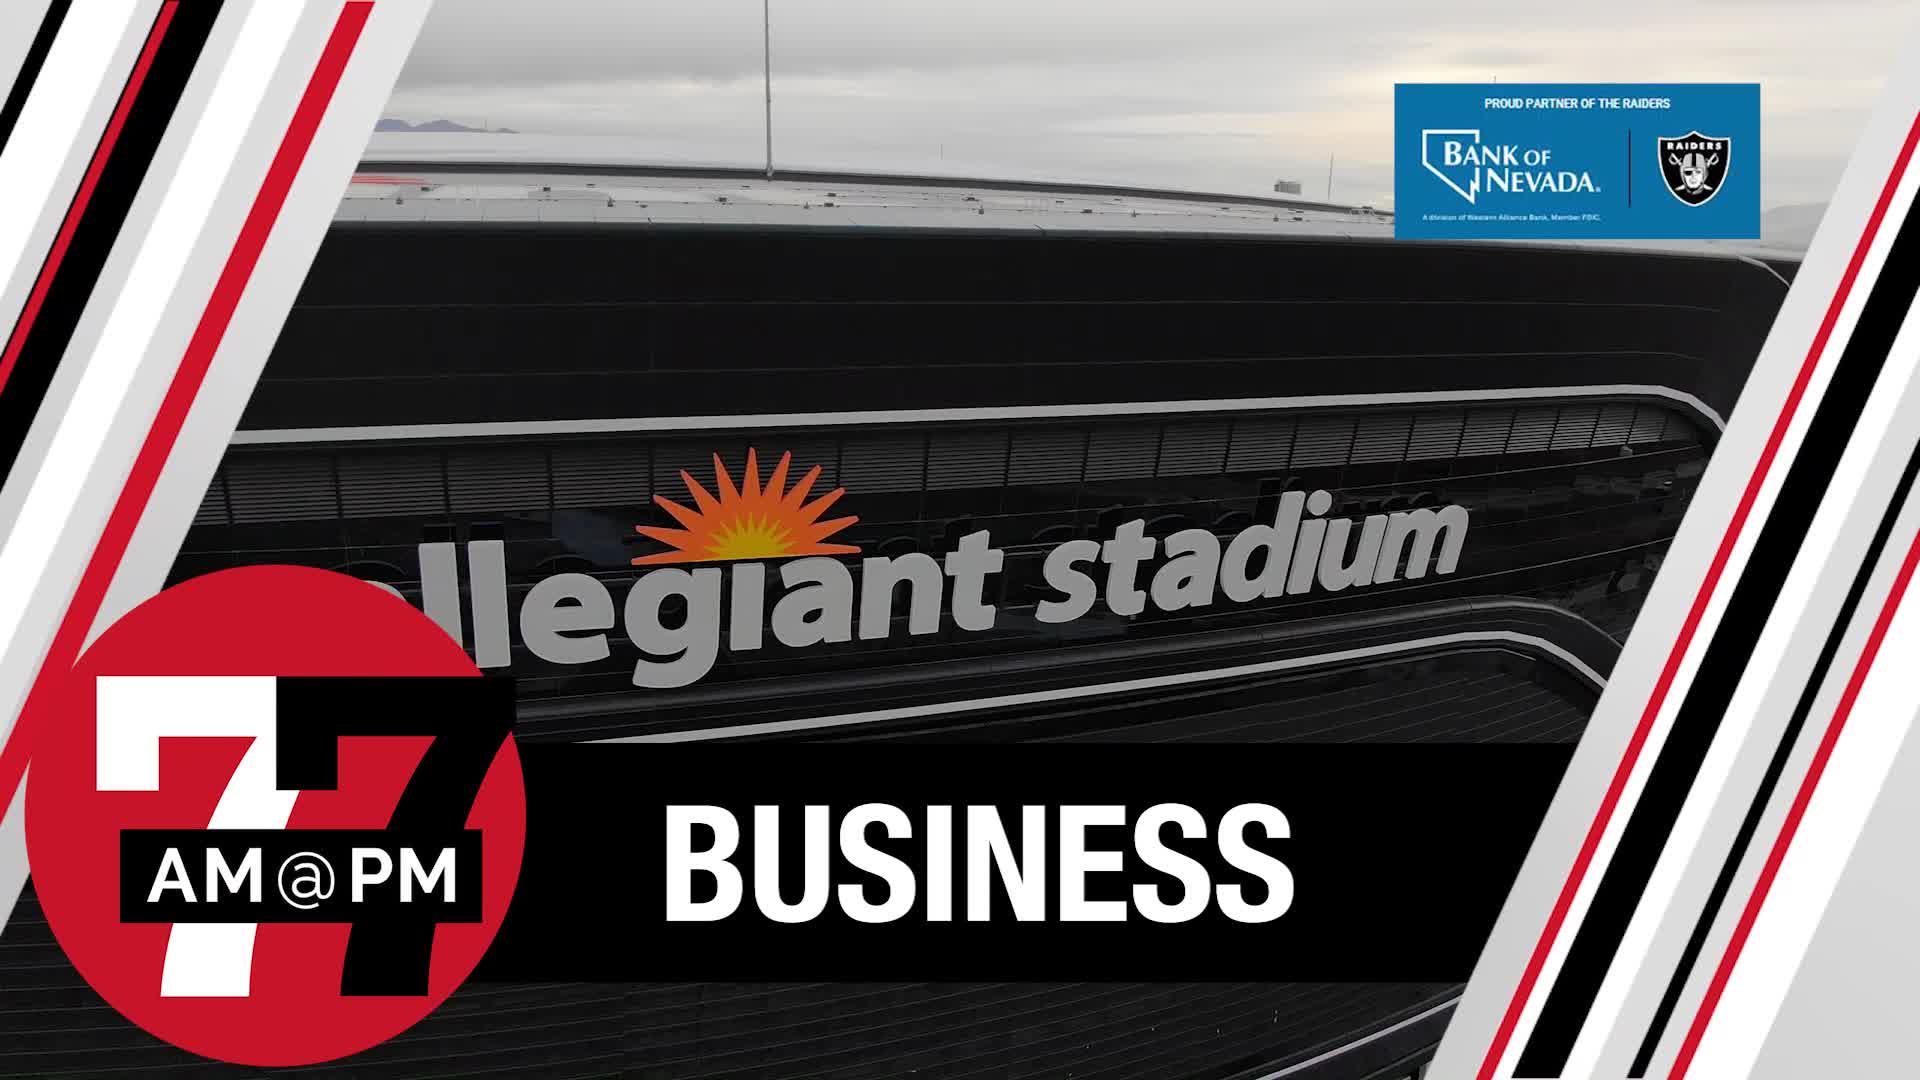 More than 500 Thousand Attend Events at Allegiant Stadium